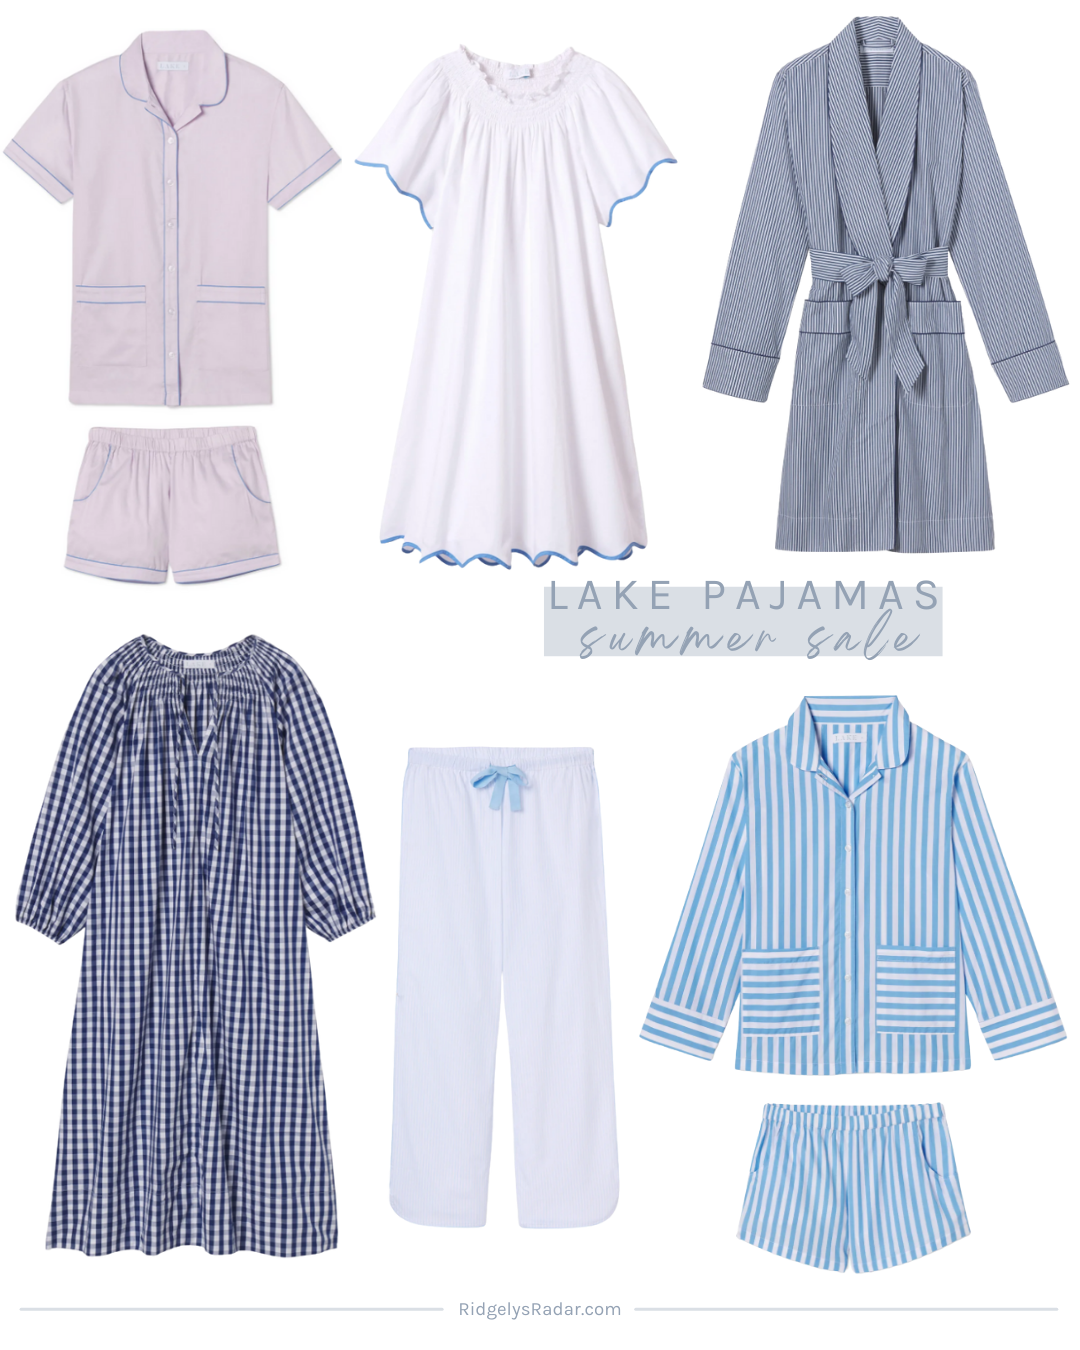 Stock up at the Lake Pajamas Summer sale with super soft poplin cotton sets for babies, kids, maternity, ladies and men. They are the BEST!